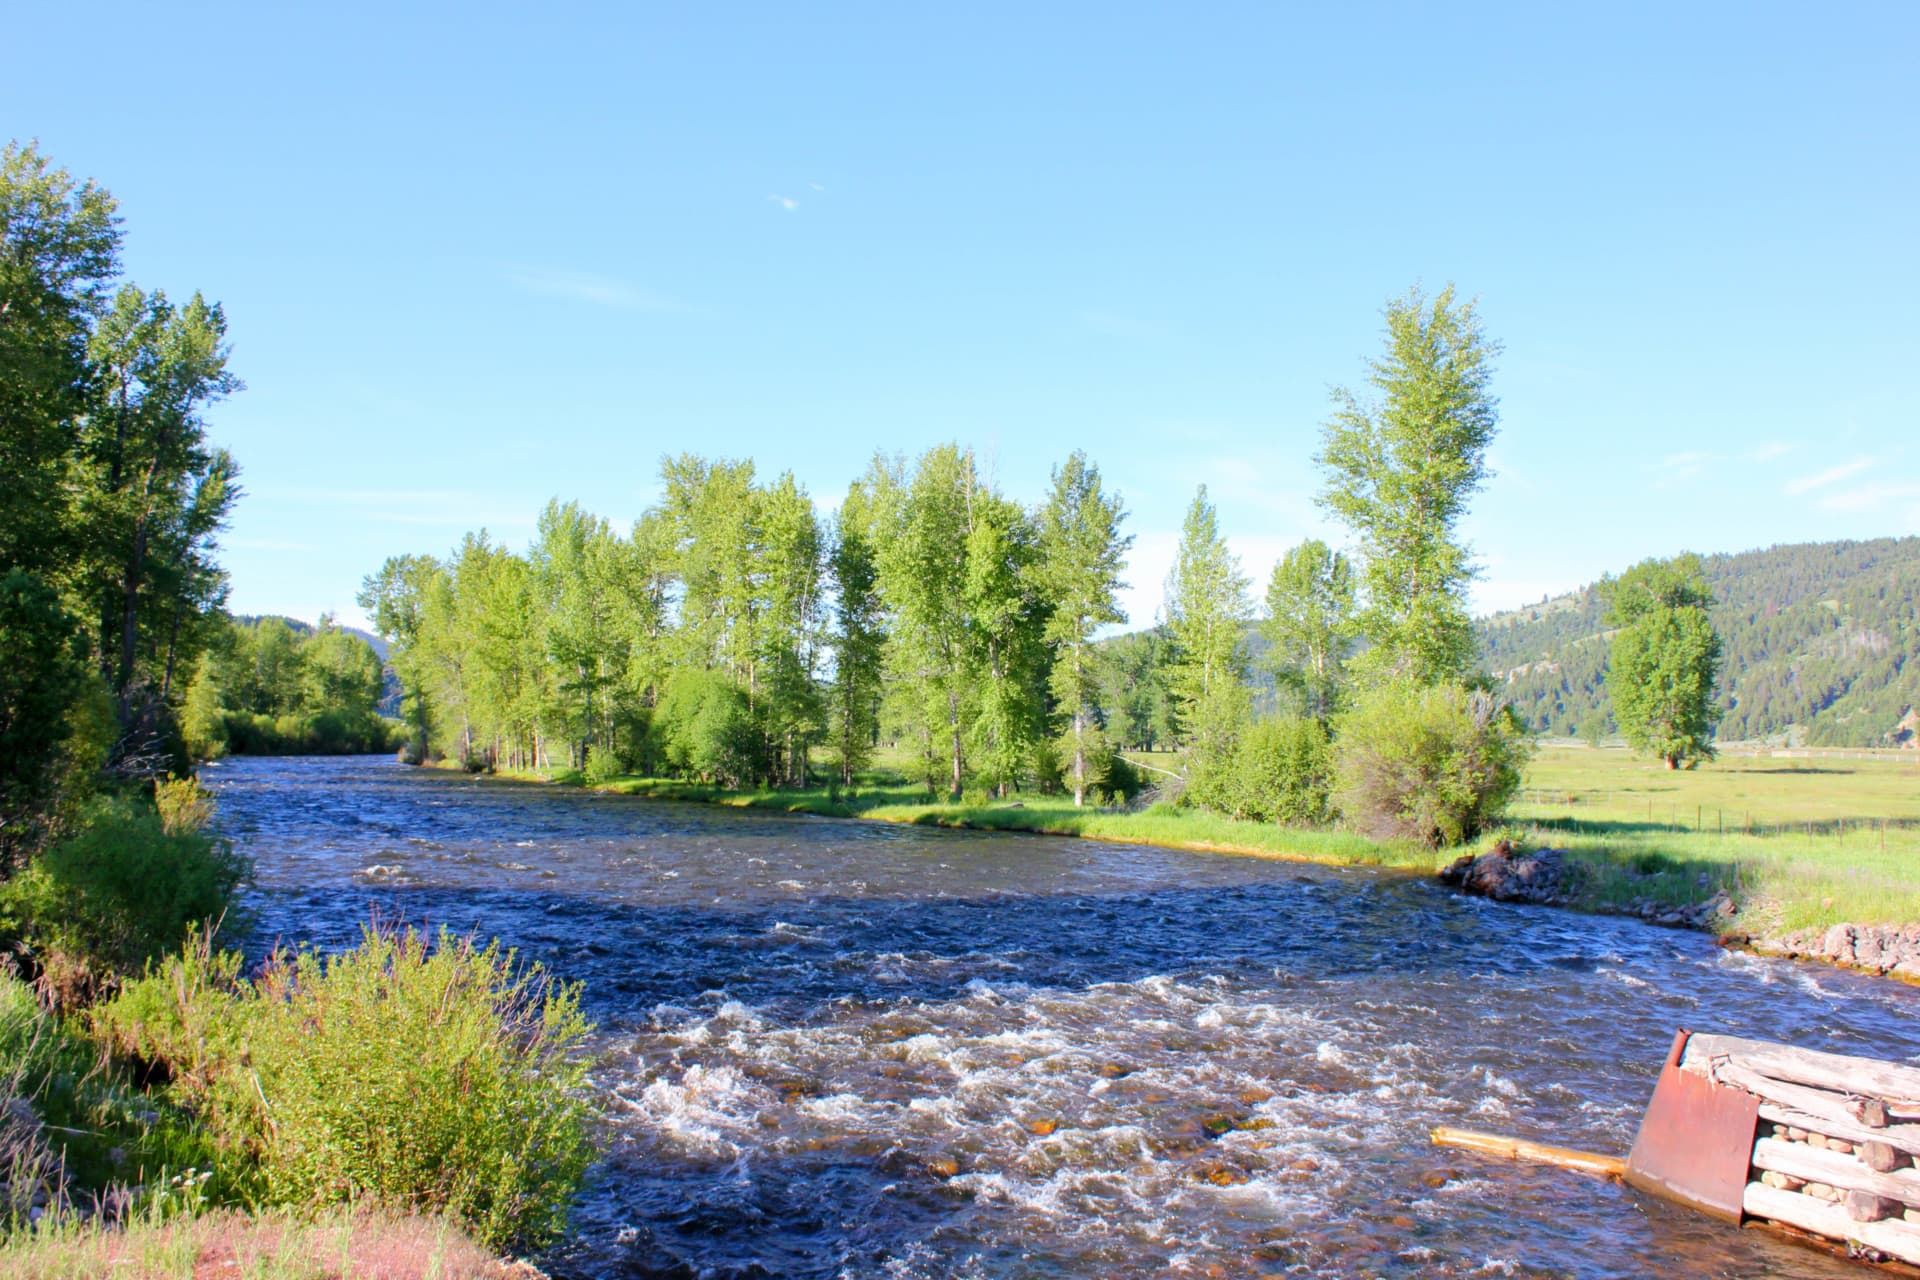 River Frontage for Sale Montana Rock Creek Cattle Ranch